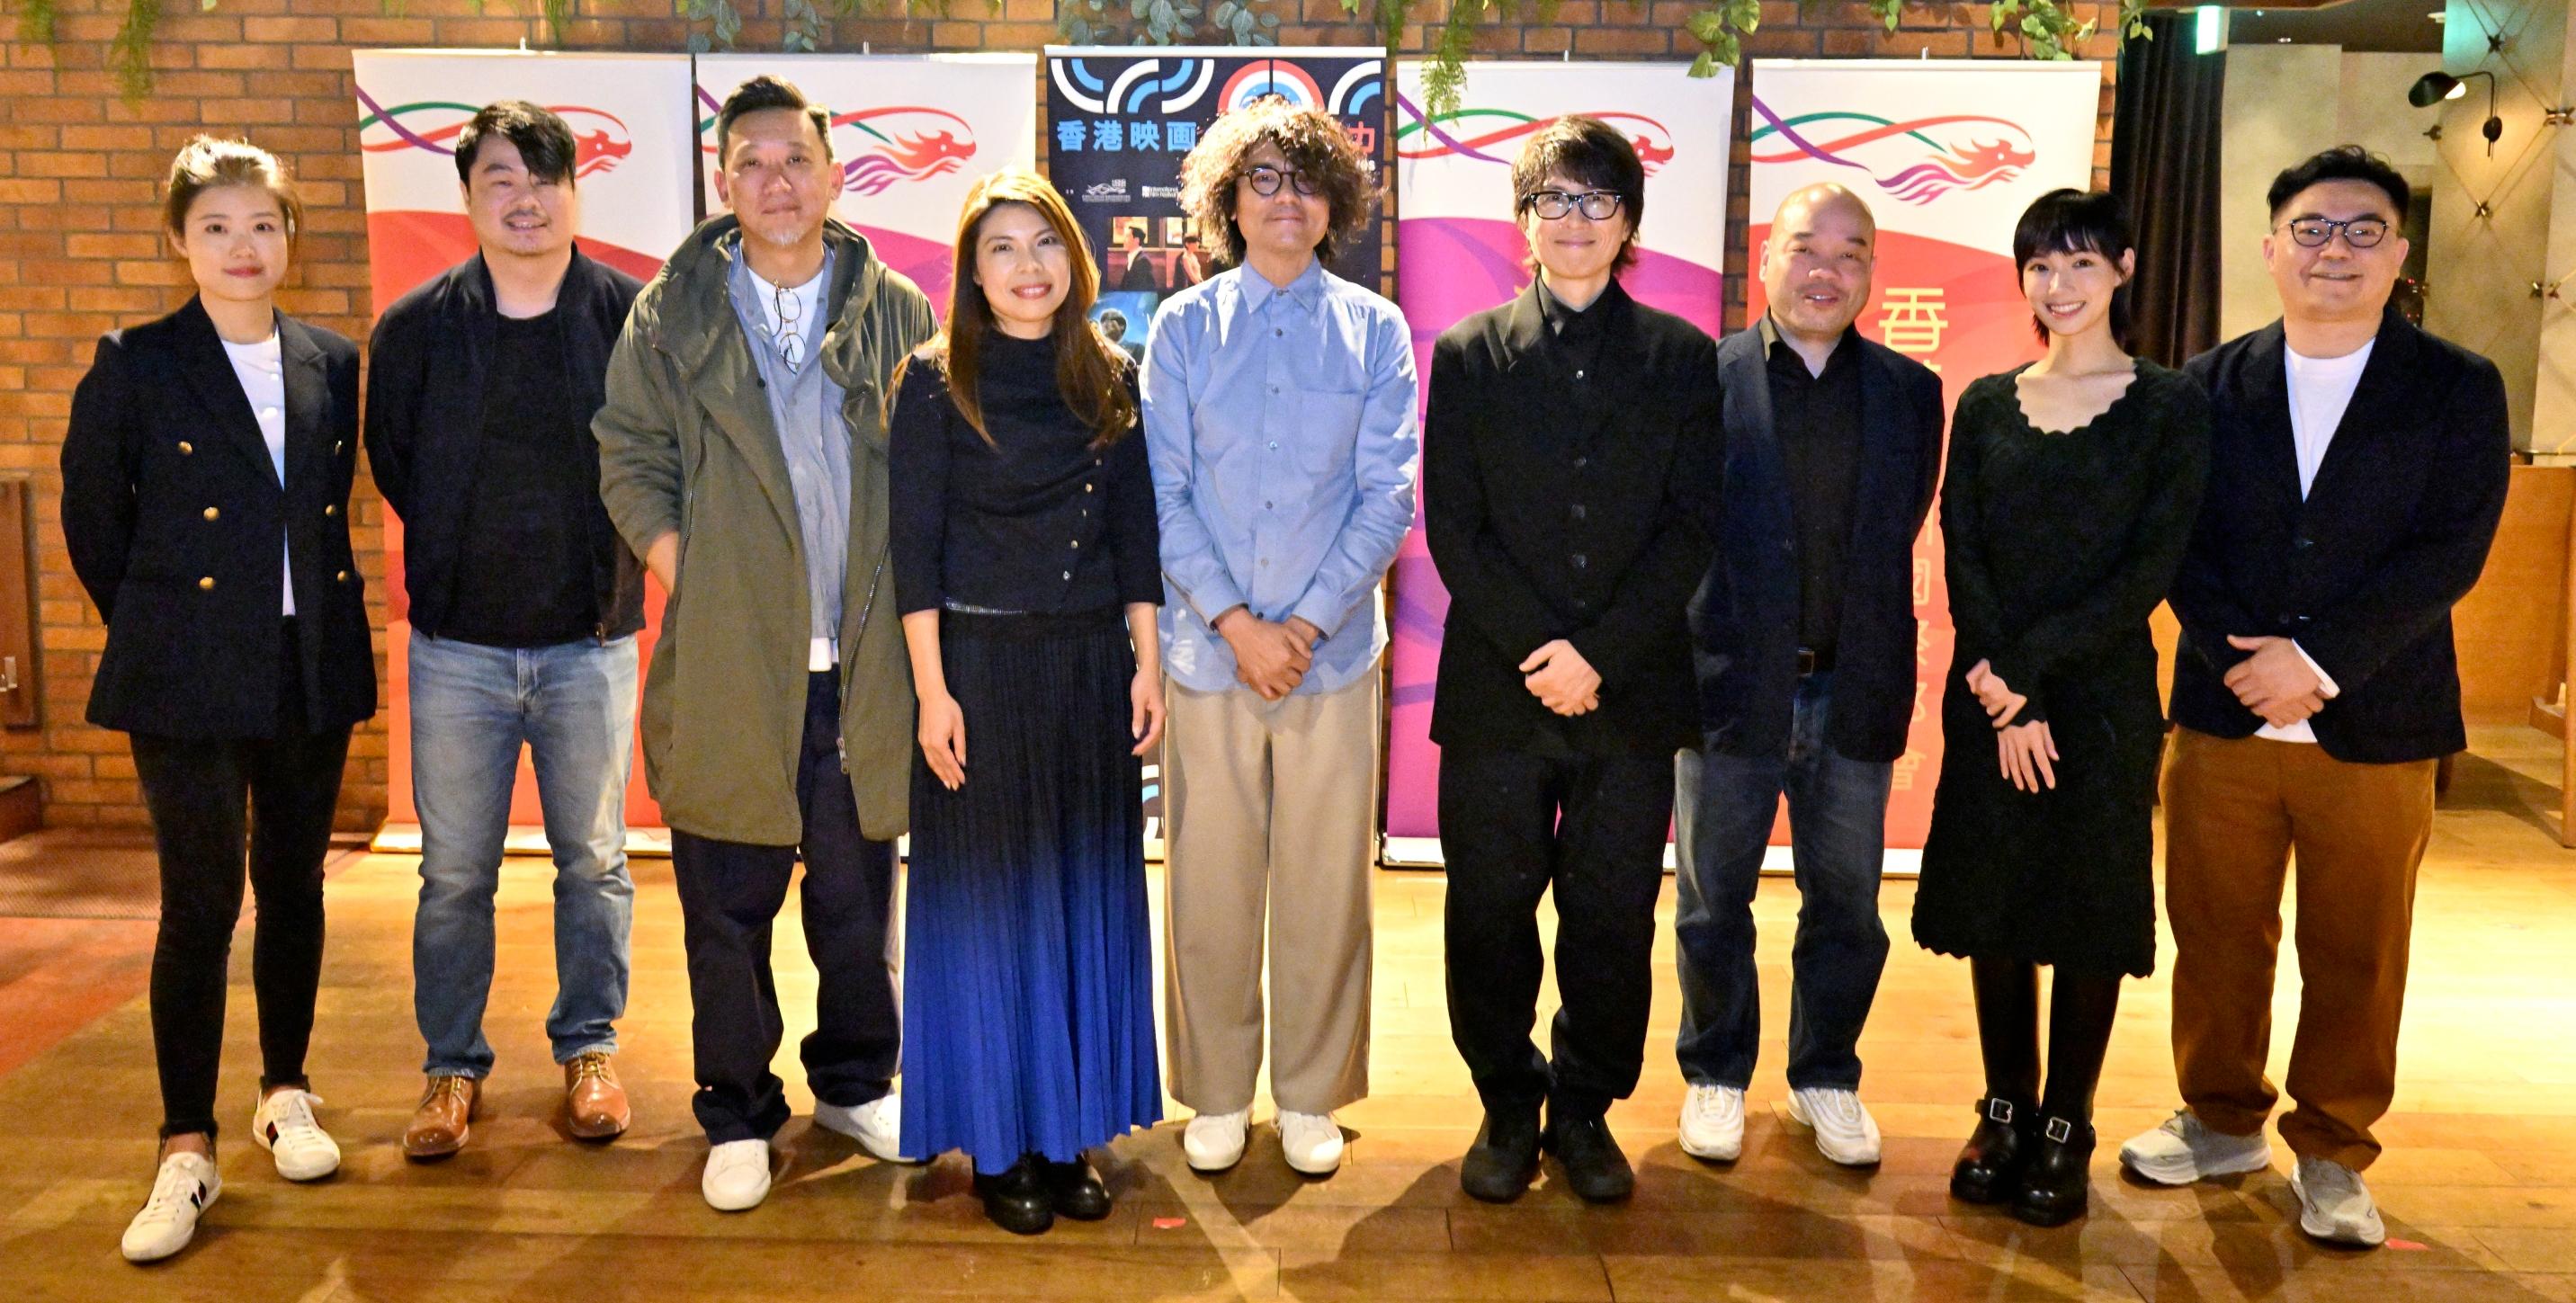 The Hong Kong Economic and Trade Office in Tokyo and the Hong Kong International Film Festival Society are jointly presenting a Hong Kong film festival "Making Waves - Navigators of Hong Kong Cinema" in Tokyo, Japan, showcasing a selection of new and restored Hong Kong films from today (November 2) to November 5. Photo shows (from left) "Where the Wind Blows" screenwriter Sun Fei and director Philip Yung; "Mad Fate" director Soi Cheang; the Principal Hong Kong Economic and Trade Representative (Tokyo), Miss Winsome Au; "Mad Fate" actor Gordon Lam; "A Guilty Conscience" actor Dayo Wong and director Jack Ng; and "Once in a Blue Moon" actress Gladys Li and director Andy Lo at the opening reception today.